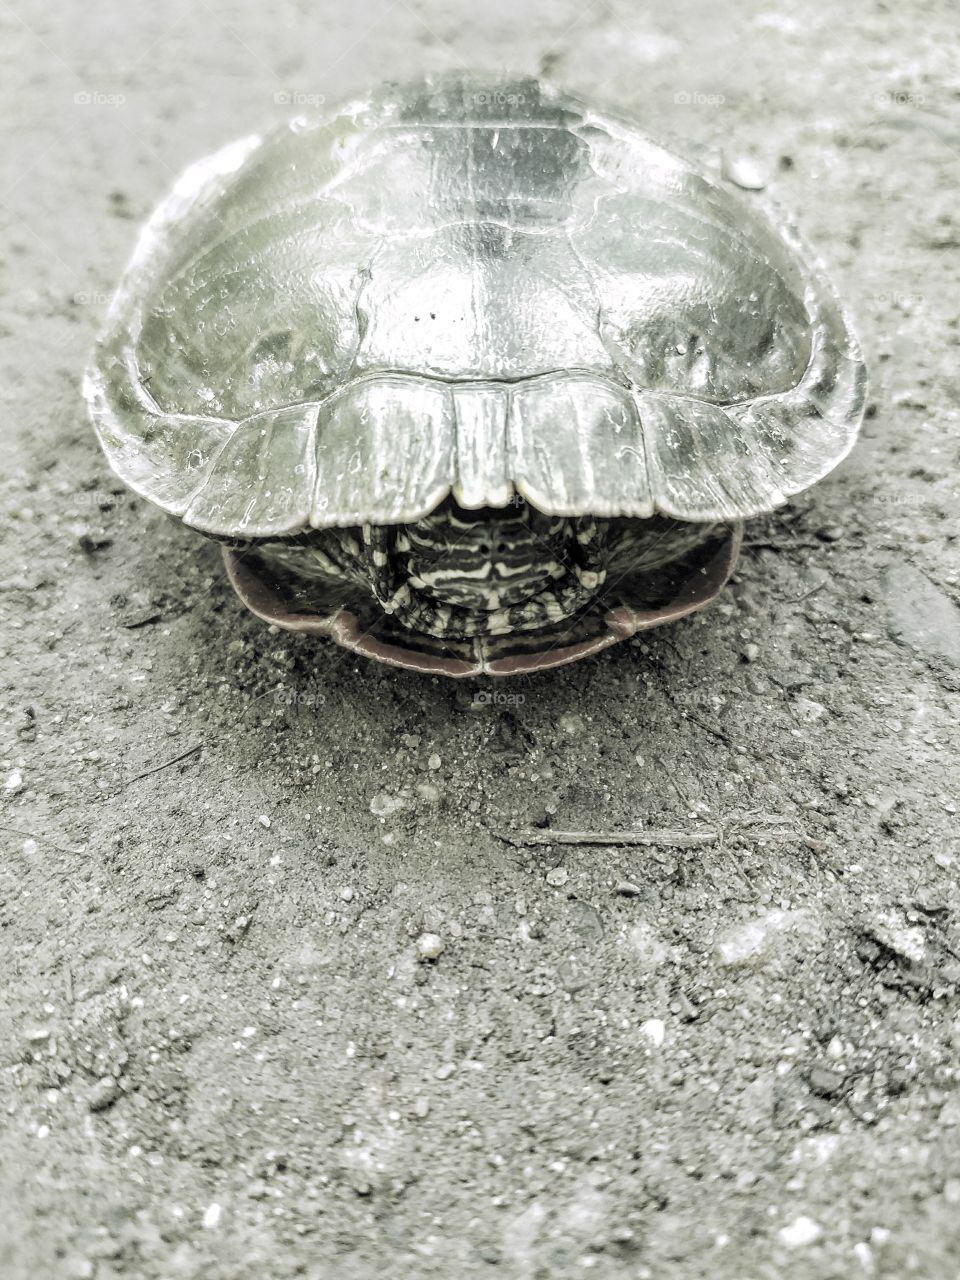 Black and White Painted Turtle